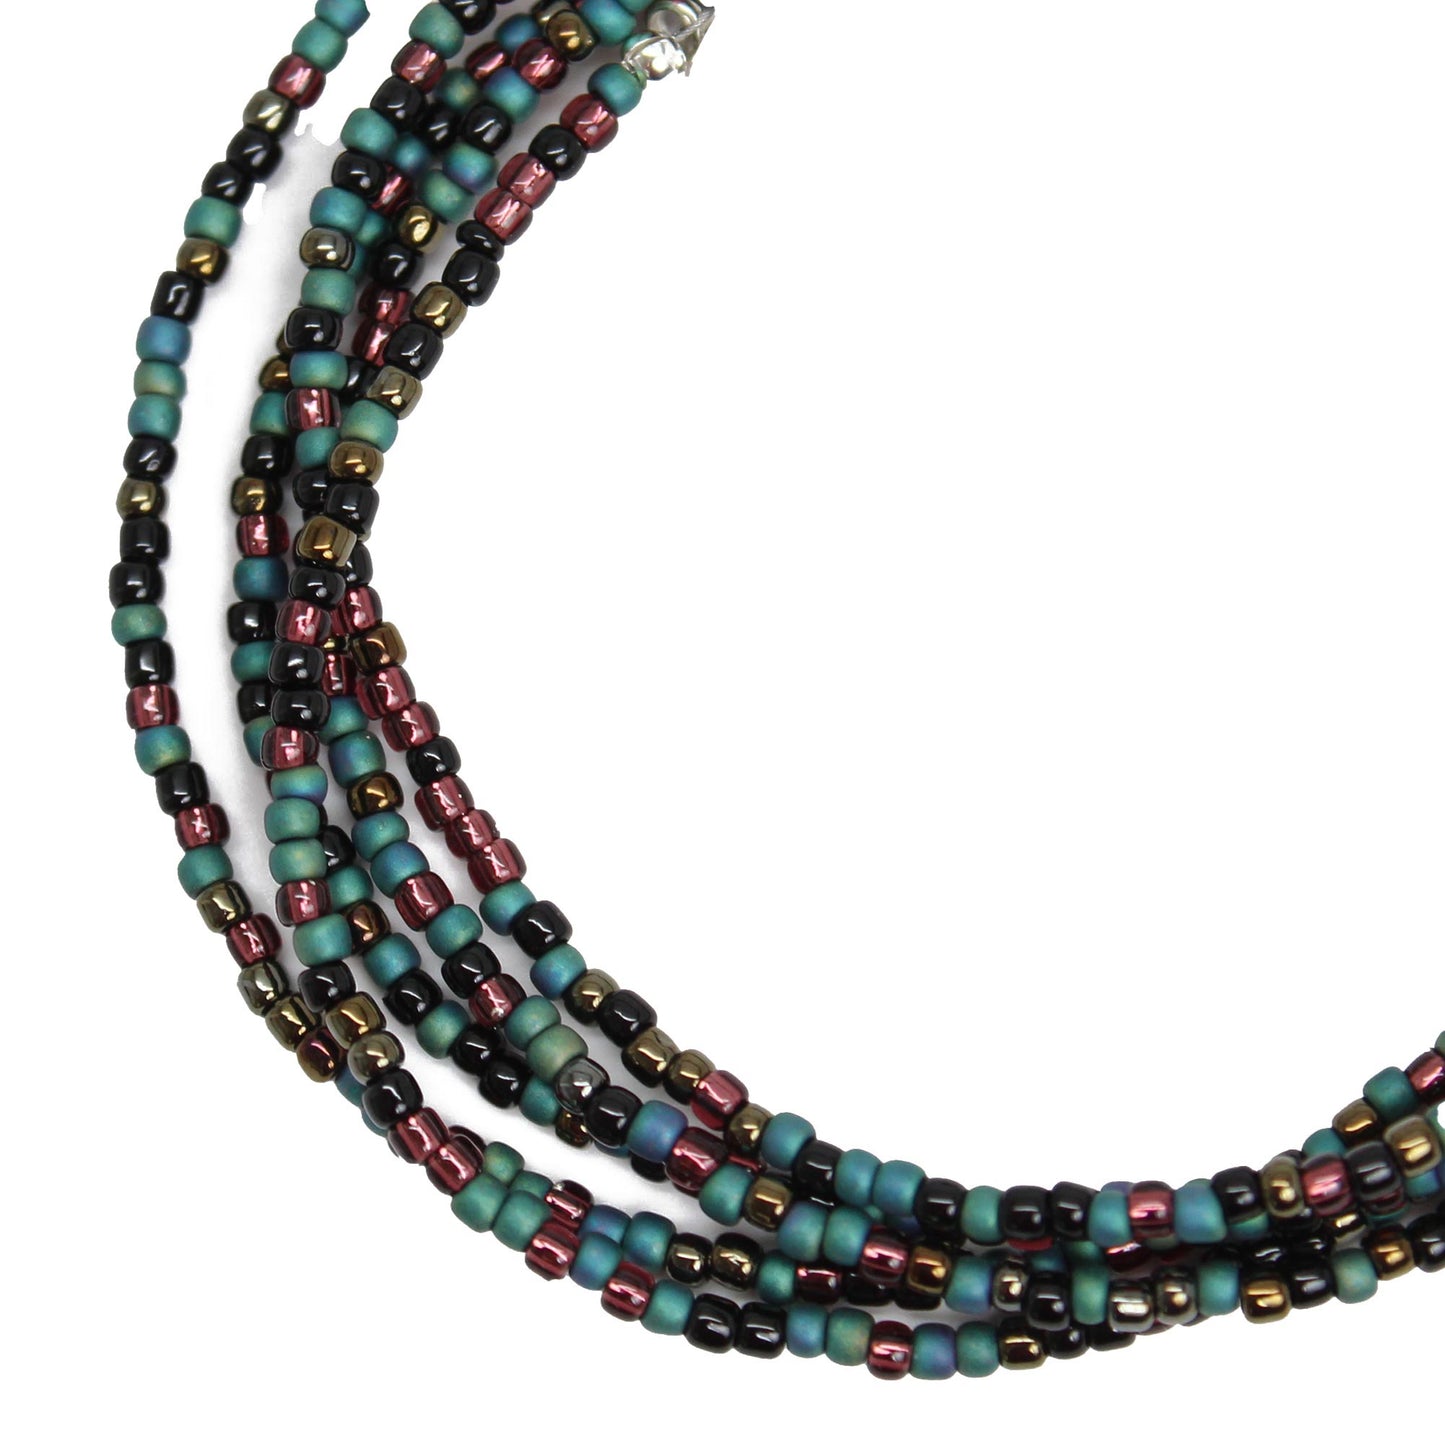 Mixed Teal Green Black and Plum Seed Bead Necklace, Thin 1.5mm Single Strand